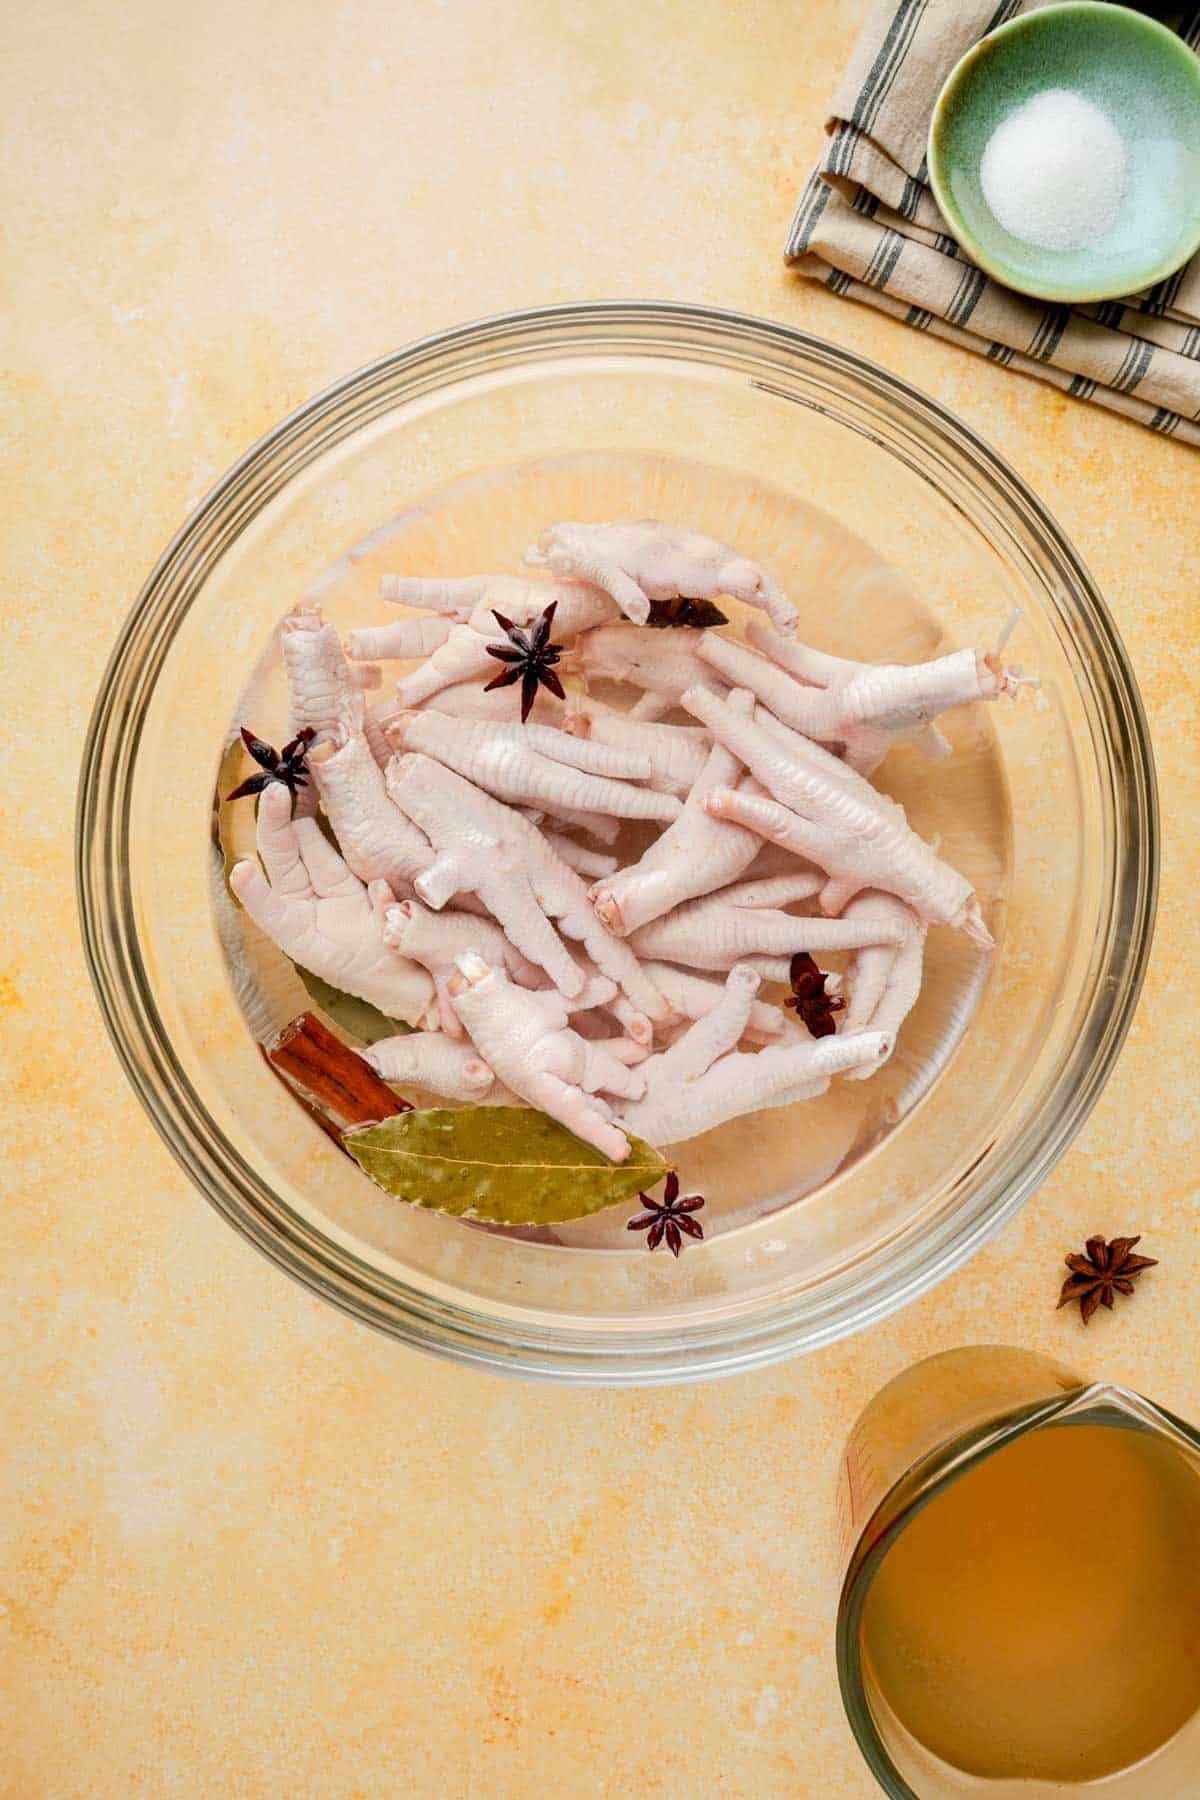 raw chicken feet in a bowl of water with spices